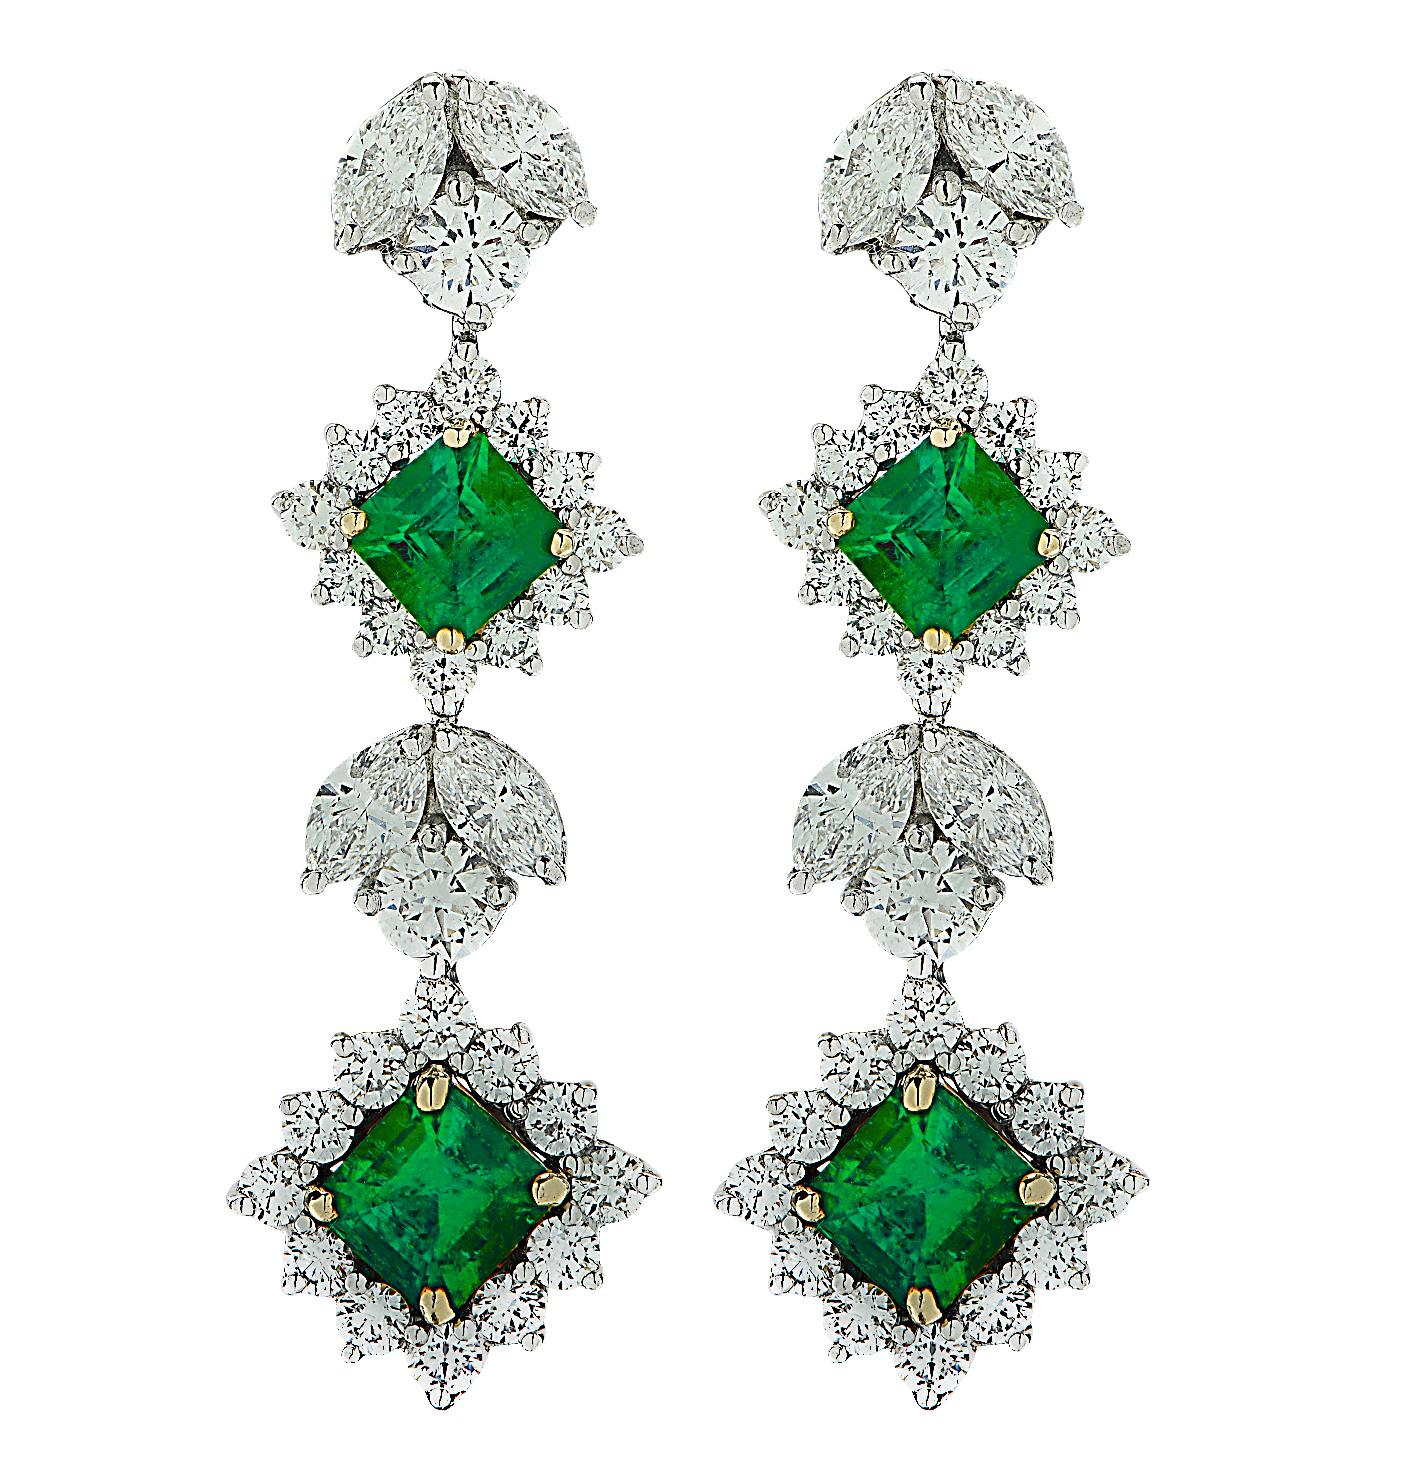 Spectacular Emerald and Diamond dangle earrings crafted in Platinum and 18 karat yellow gold, showcasing 4 square emerald cut green emeralds weighing approximately 2.64 carats total, and 60 mixed round brilliant cut and marquise cut diamonds